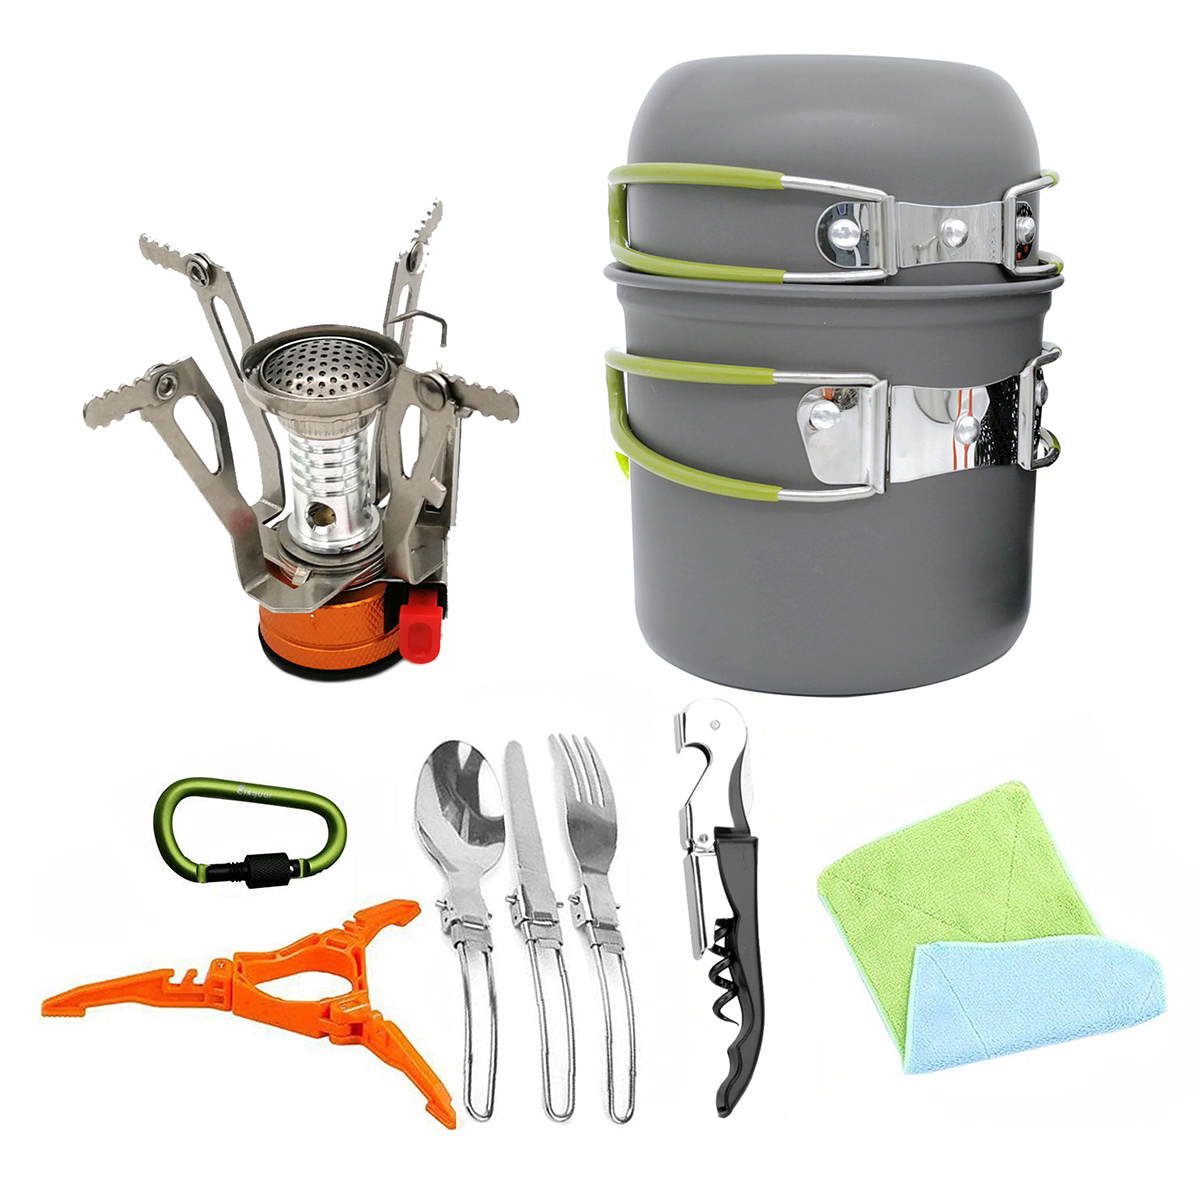 Find Portable Backpacking Outdoor Picnic Set Hiking Cookware Camping Pot Bowl Stove Set Burner for Sale on Gipsybee.com with cryptocurrencies